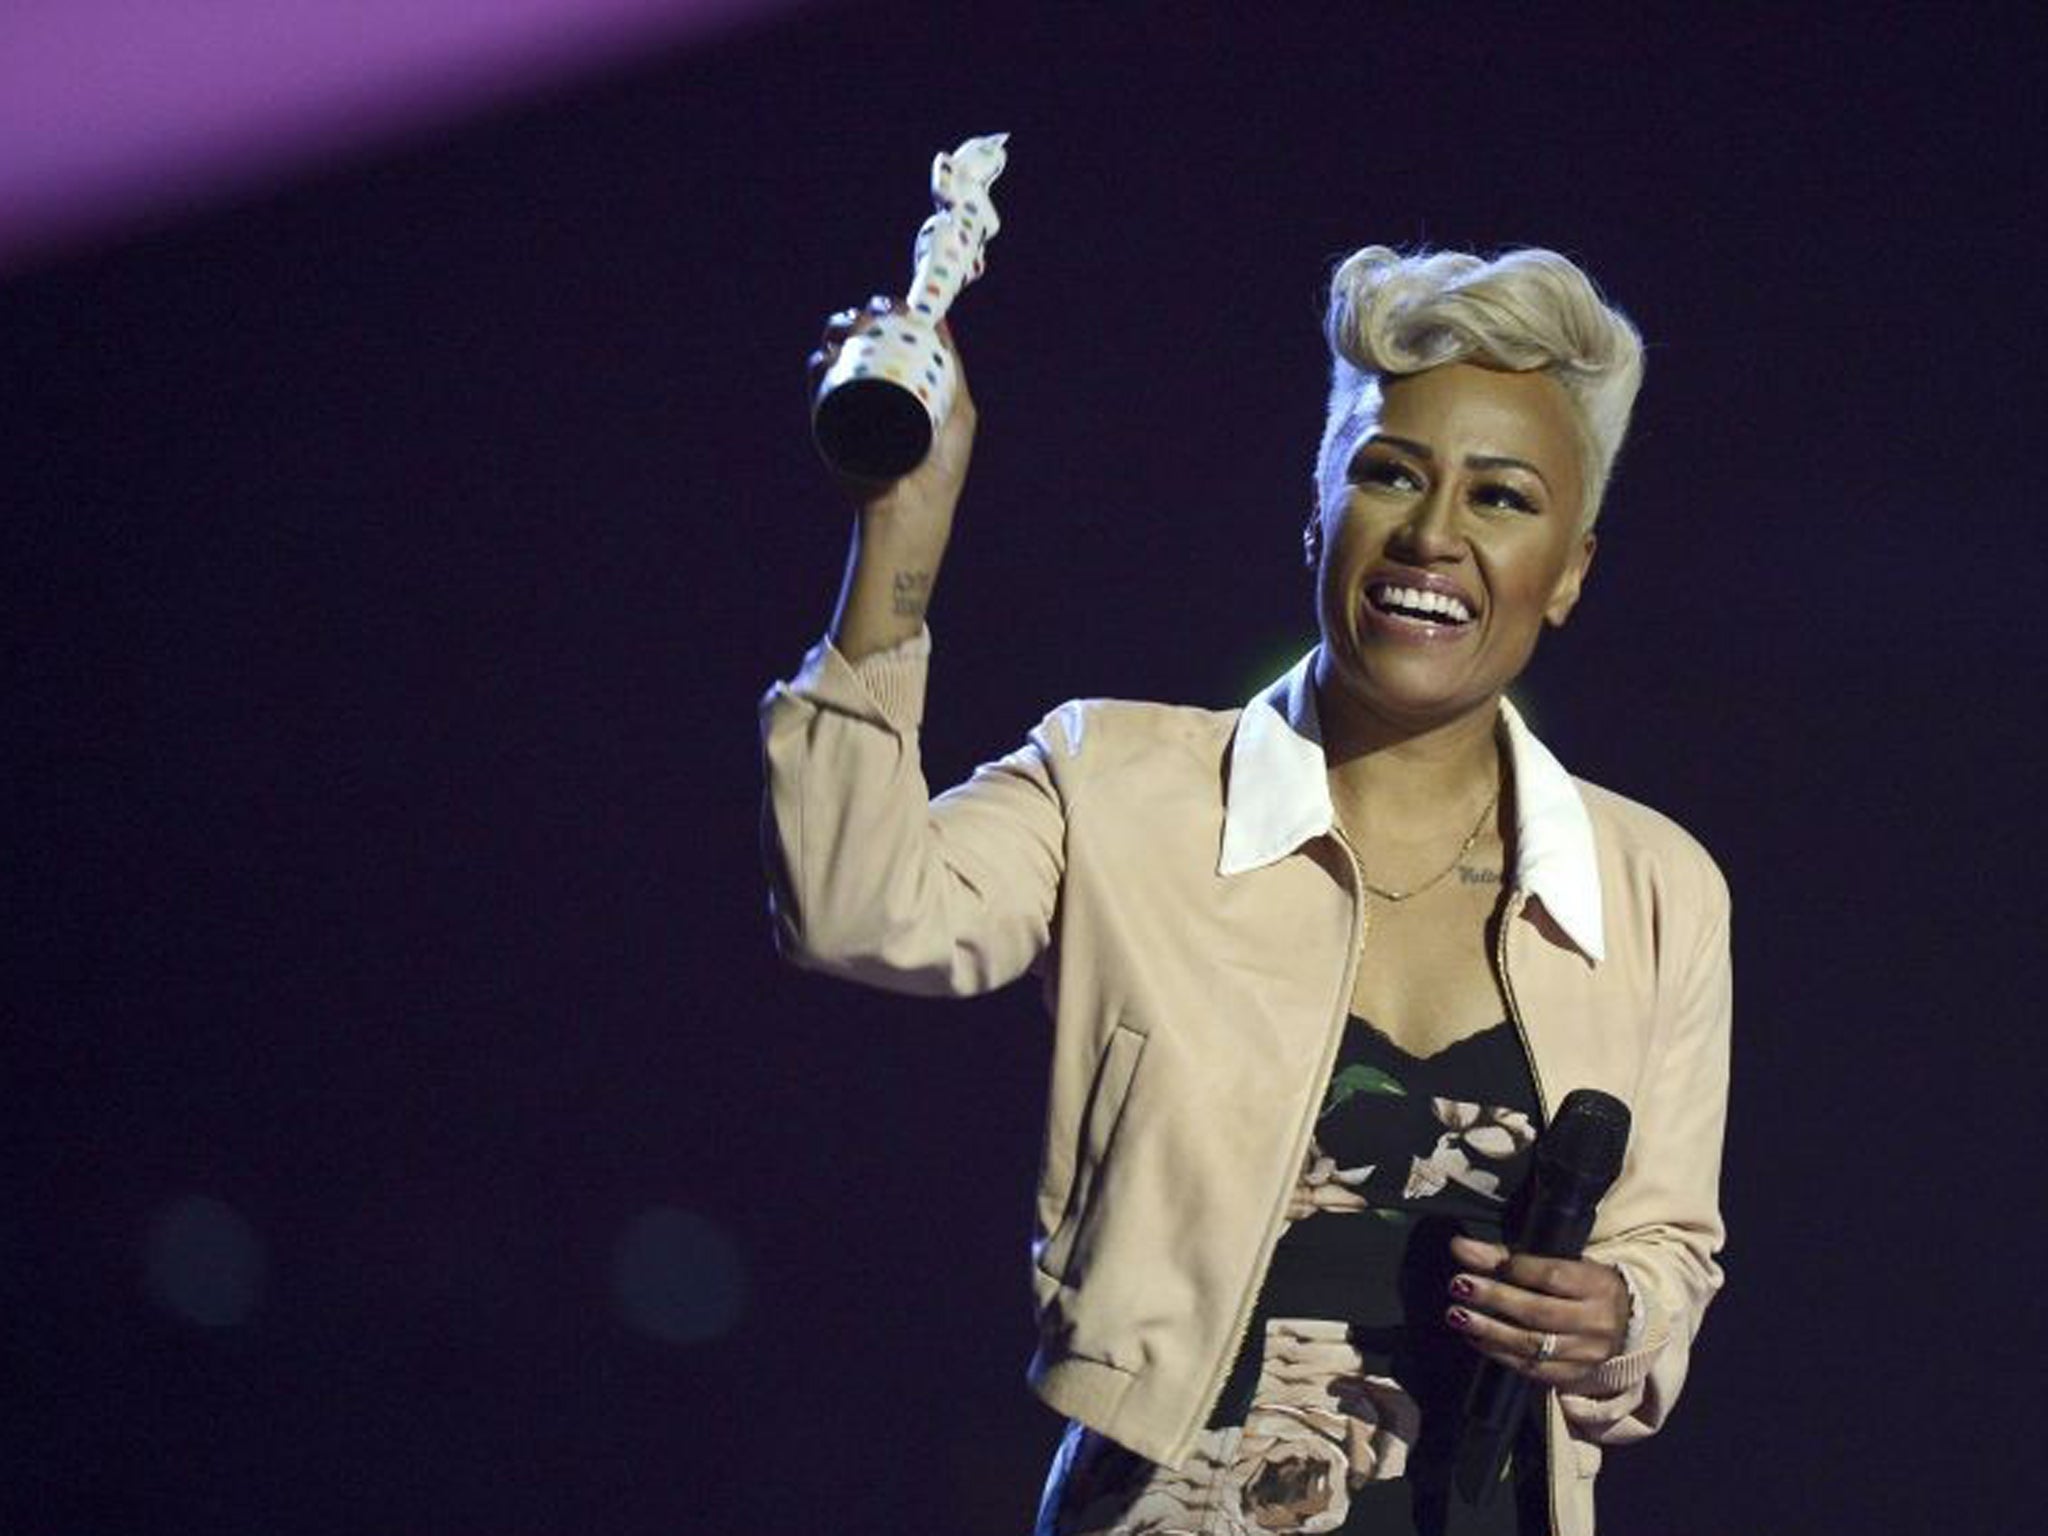 Emeli Sandé with one of her two Brit awards last week